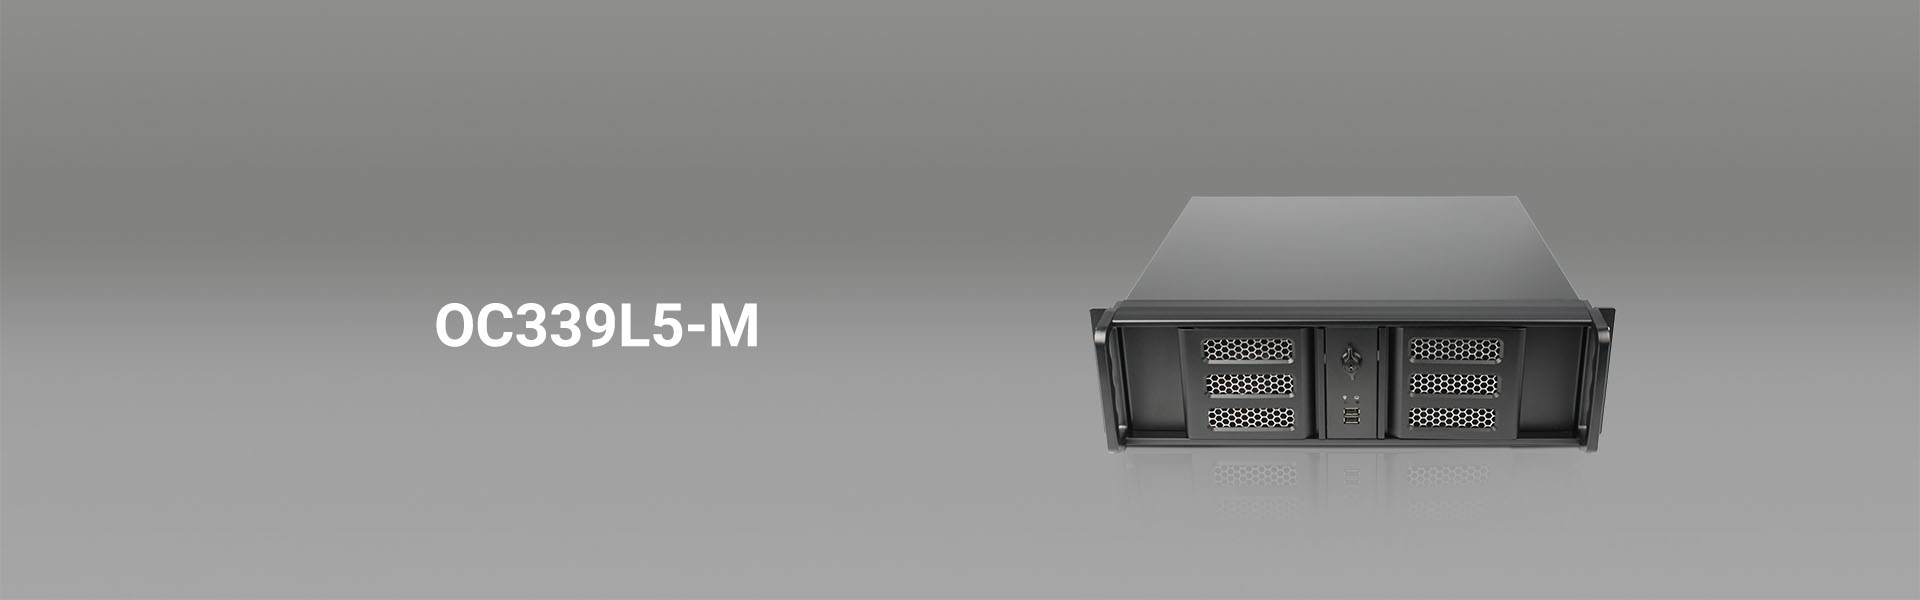 rackmount chassis-OC339L5-M onechassis-banner